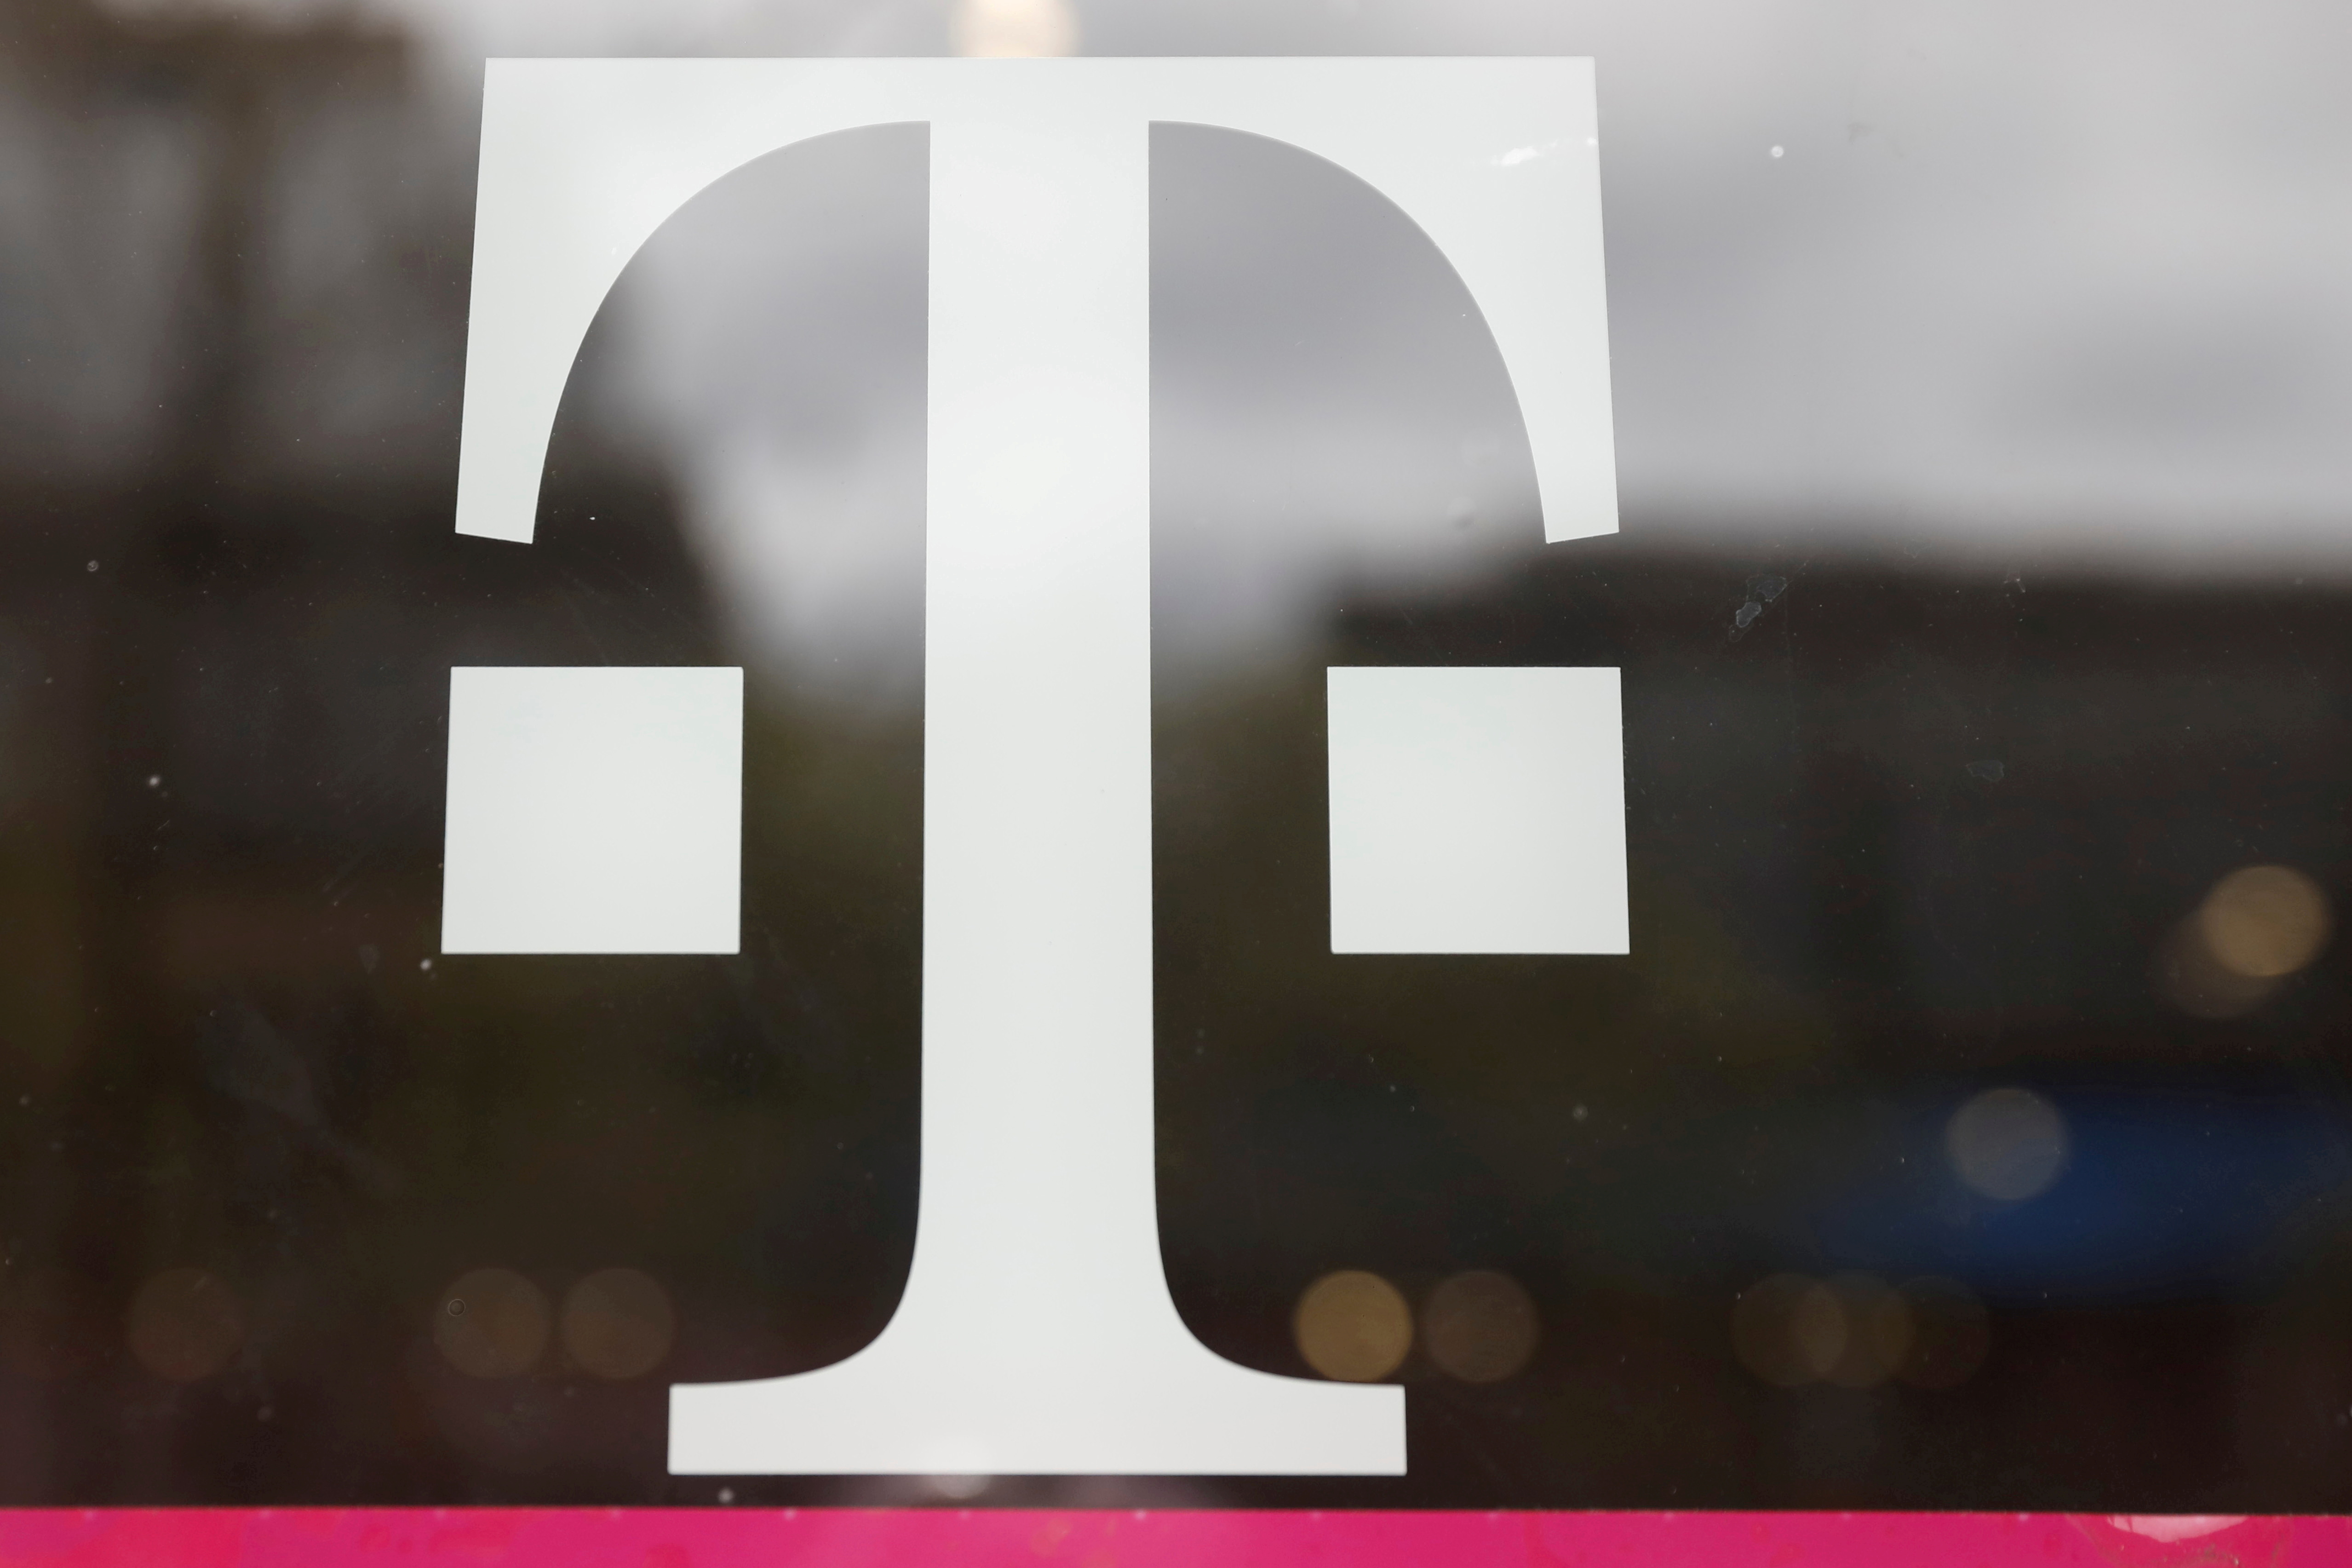 FILE PHOTO: A T-Mobile logo is seen on the storefront door of a store in Manhattan